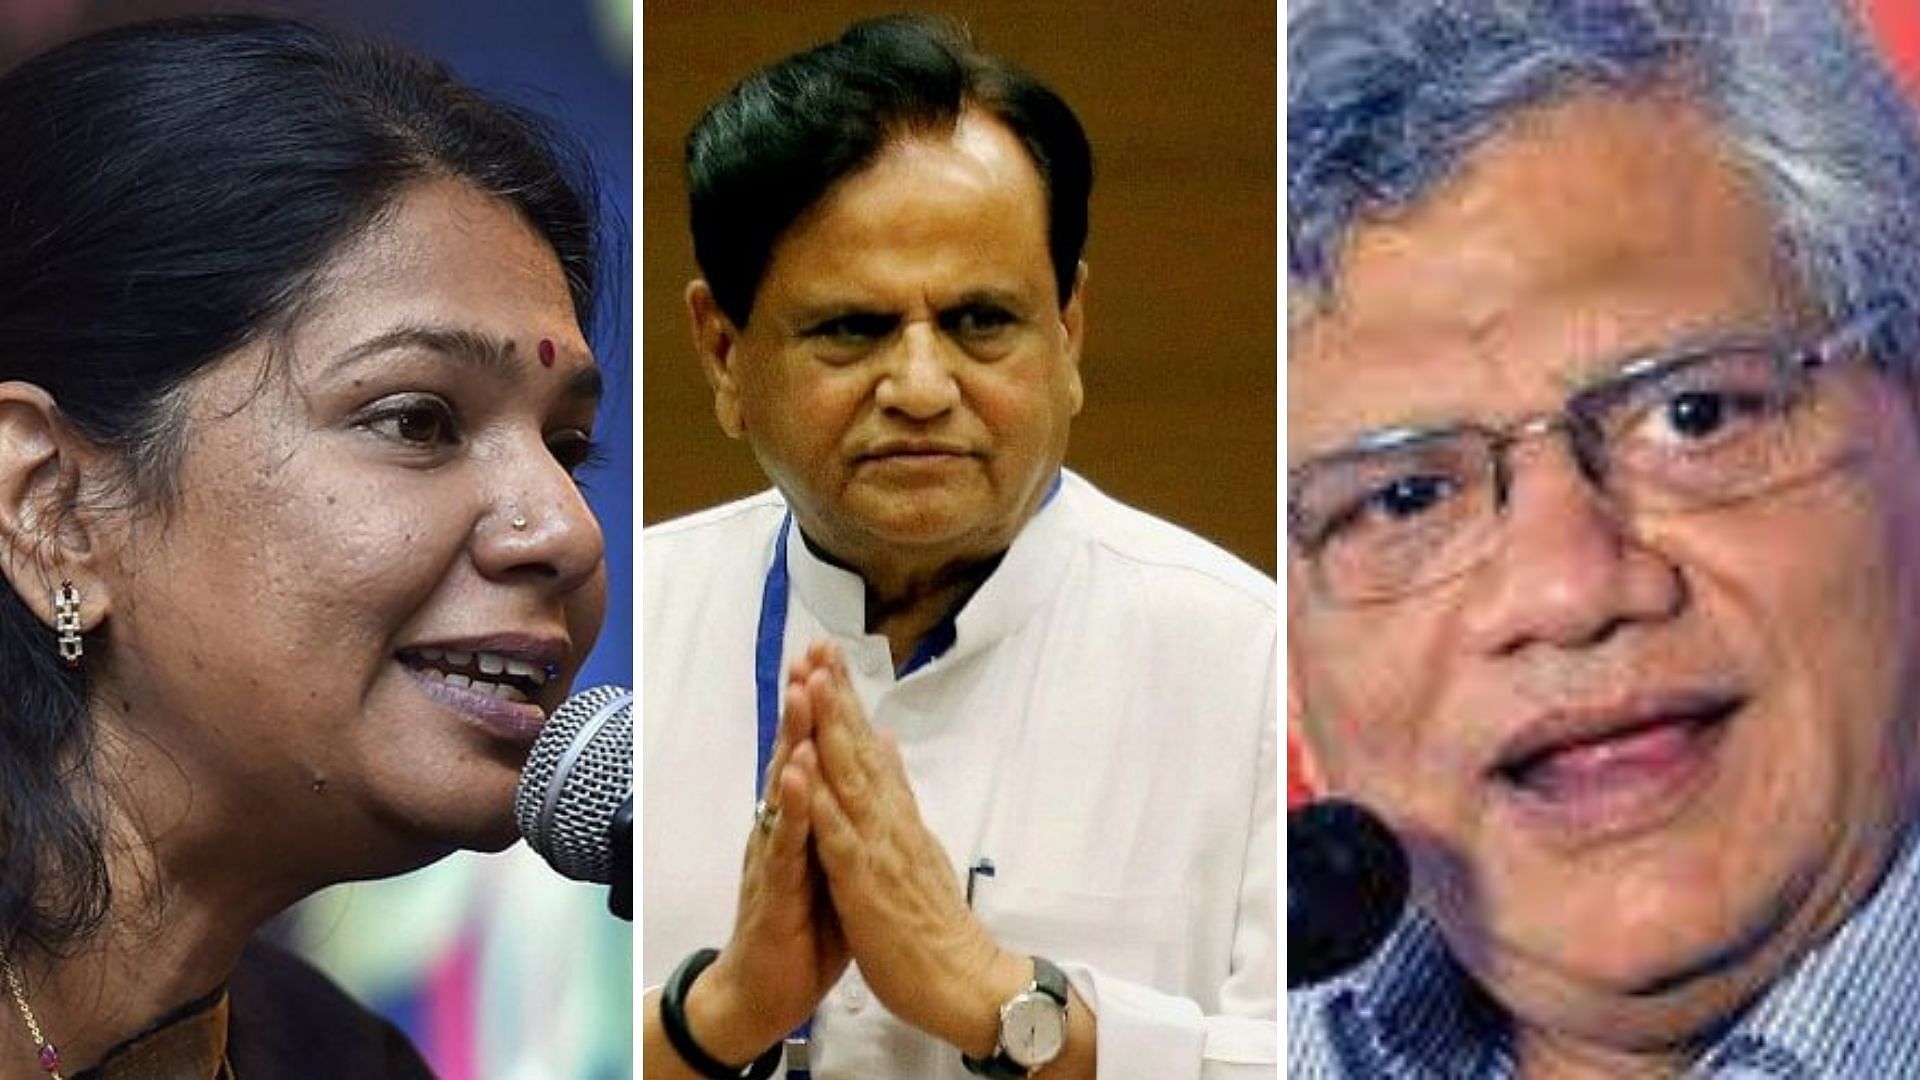 Congress leader Ahmed Patel, CPI’s D Raja, CPI(M)‘s Sitaram Yechury, DMK’s Kanimozhi and RJD’s Manoj Jha, on Thursday, 17 September, met President Ram Nath Kovind to discuss their concerns over the investigation into the Delhi riots, and the role of Delhi Police.